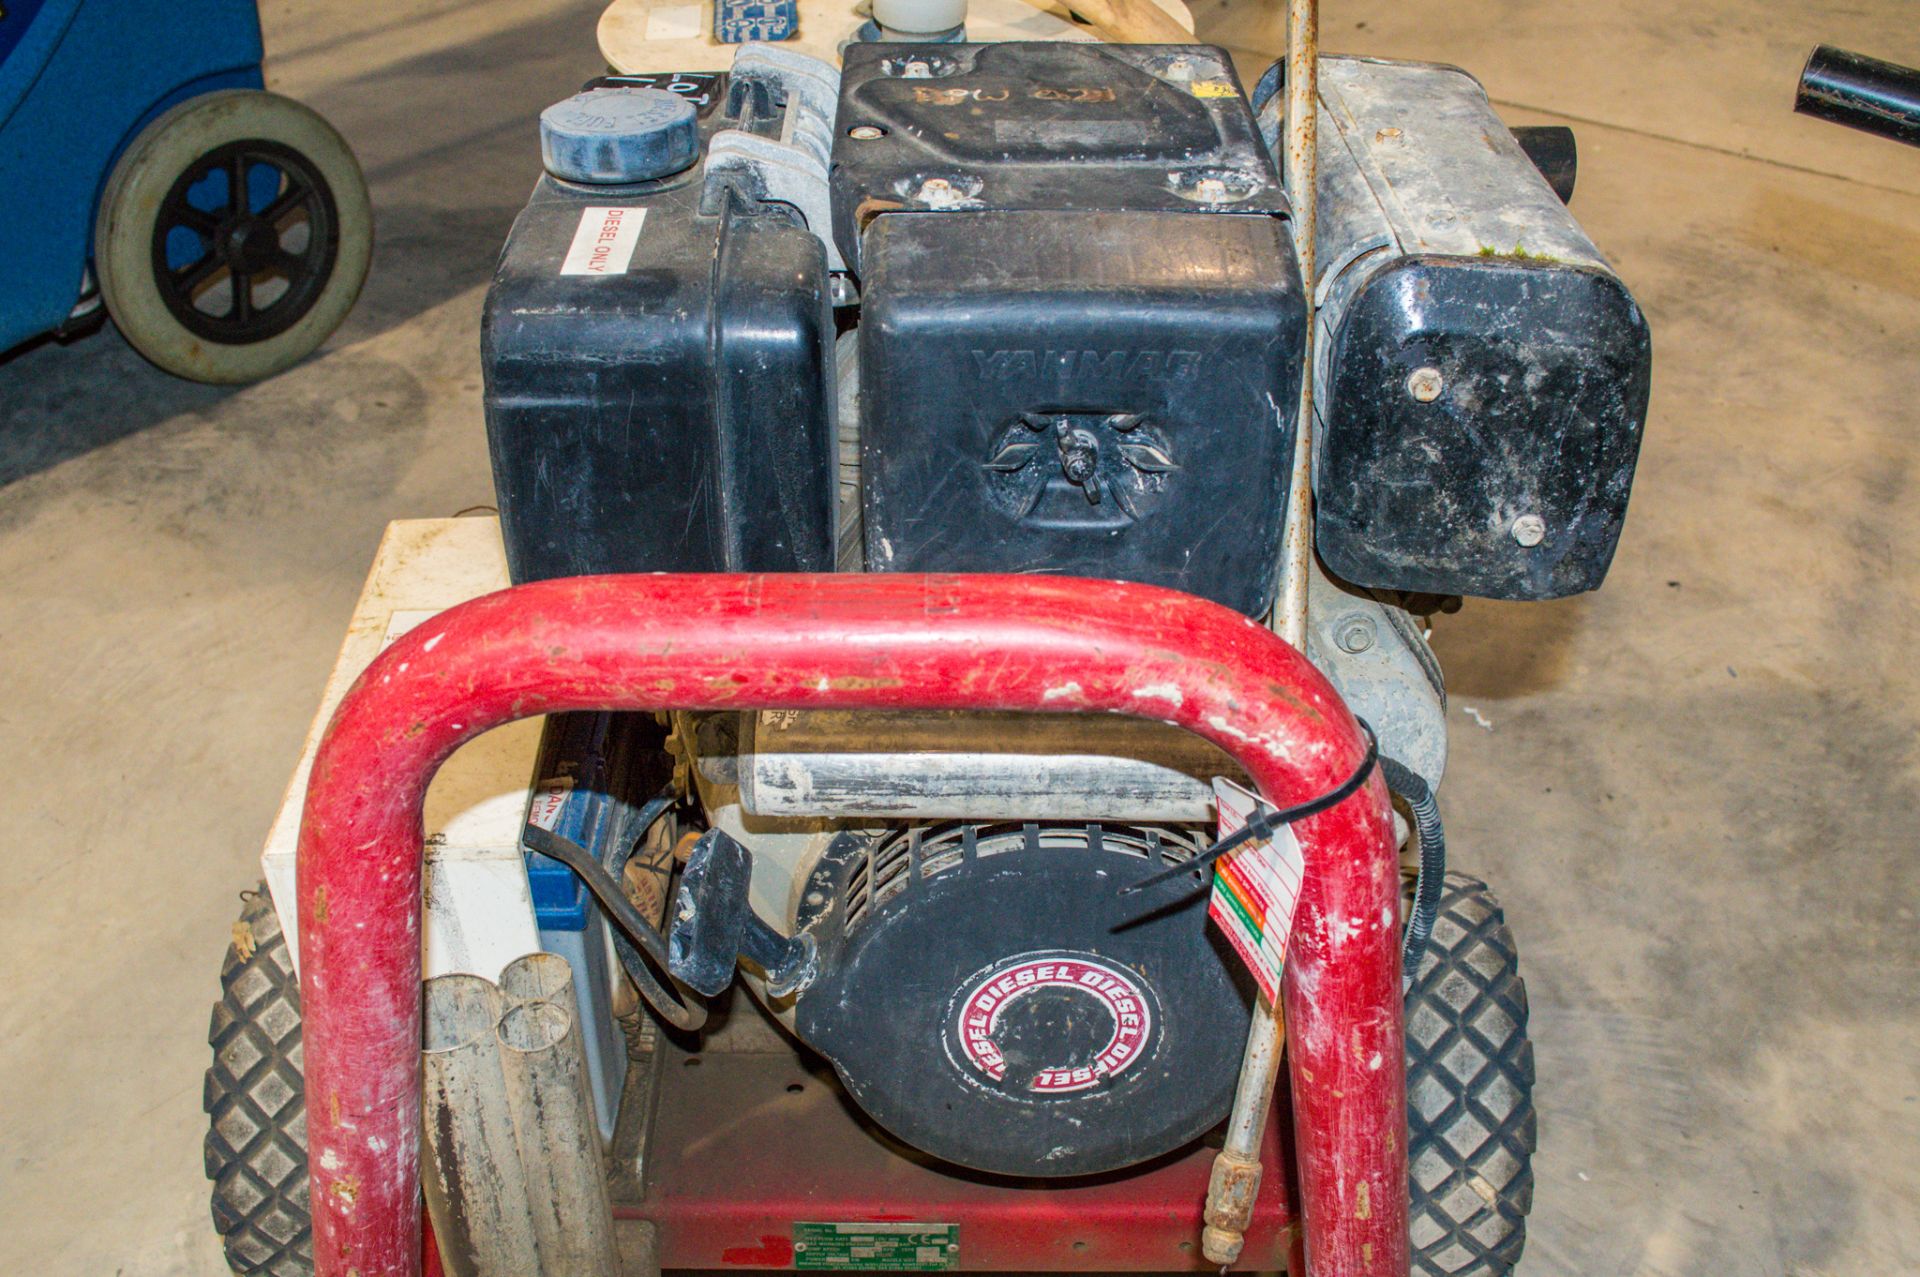 Brendon diesel driven pressure washer c/w hose and lance DPW021 - Image 2 of 2